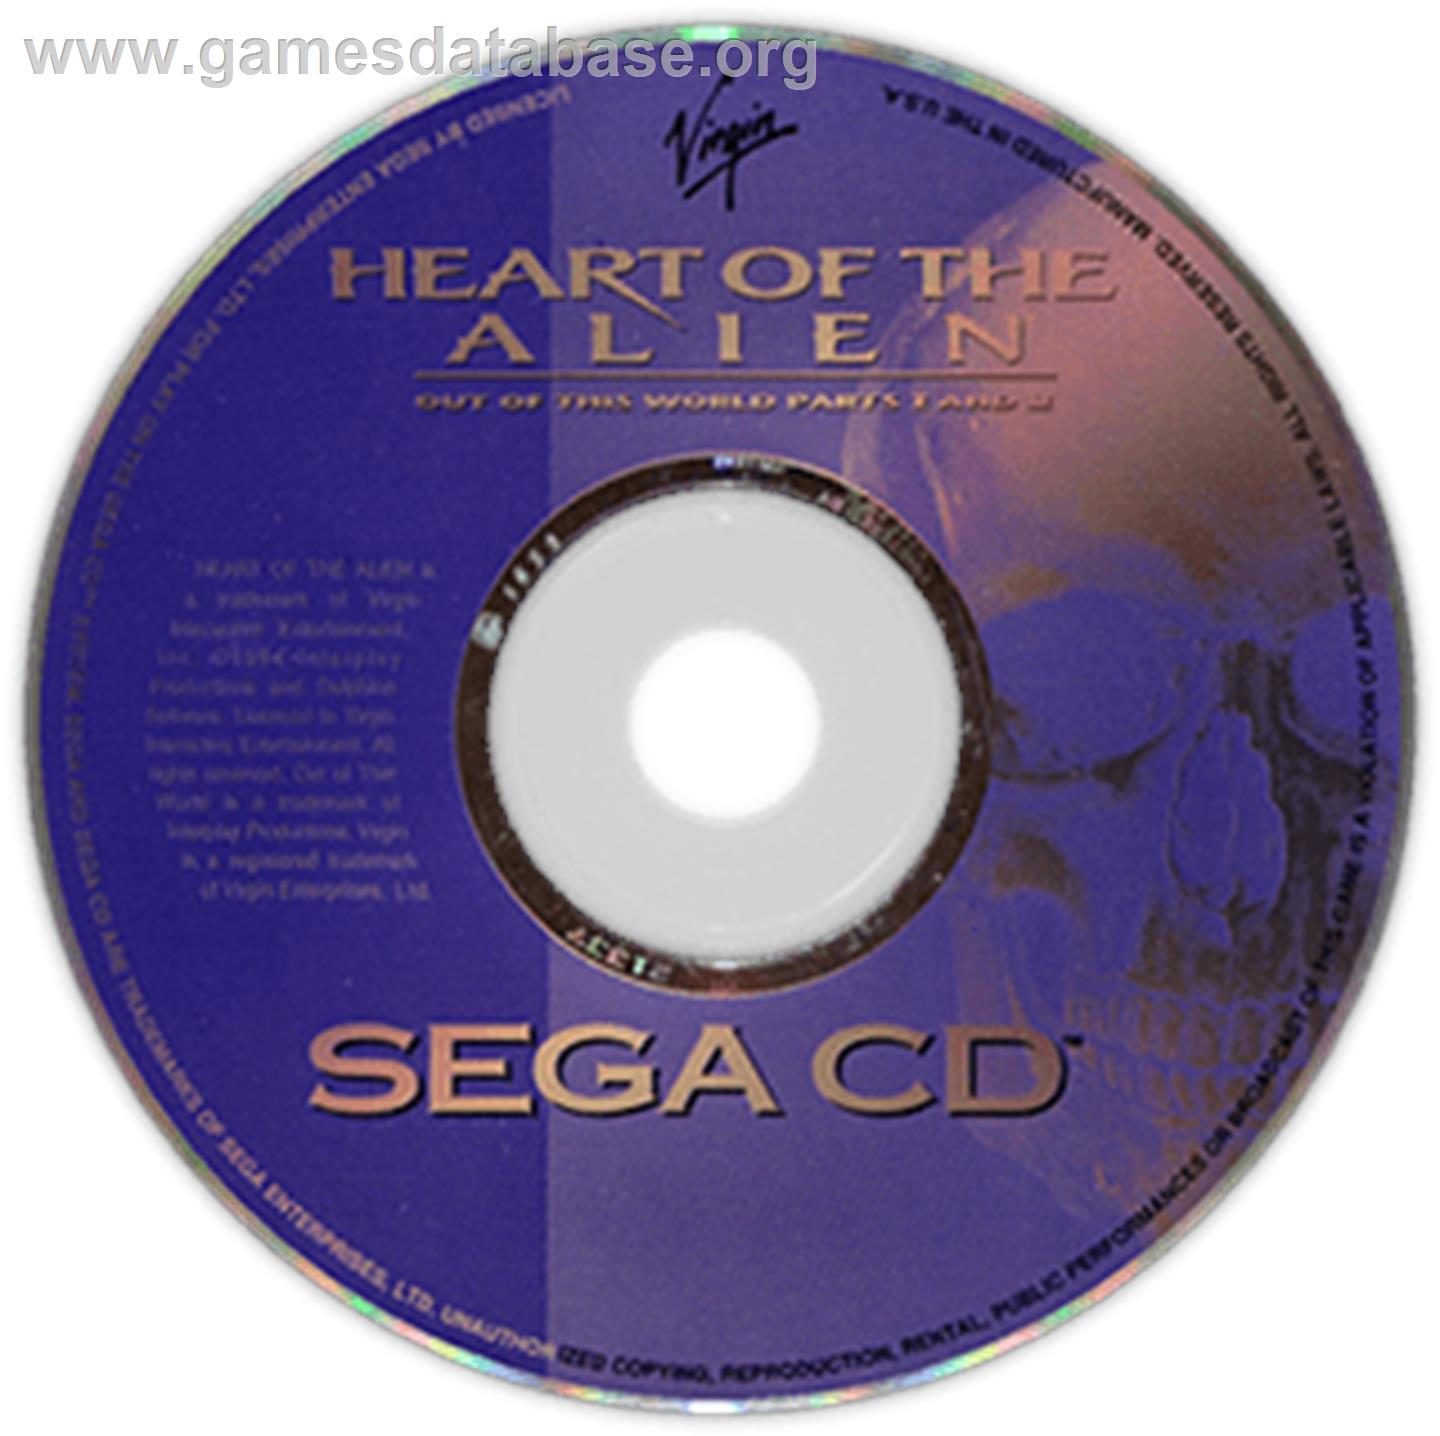 Heart of the Alien: Out of this World parts I and 2 - Sega CD - Artwork - Disc